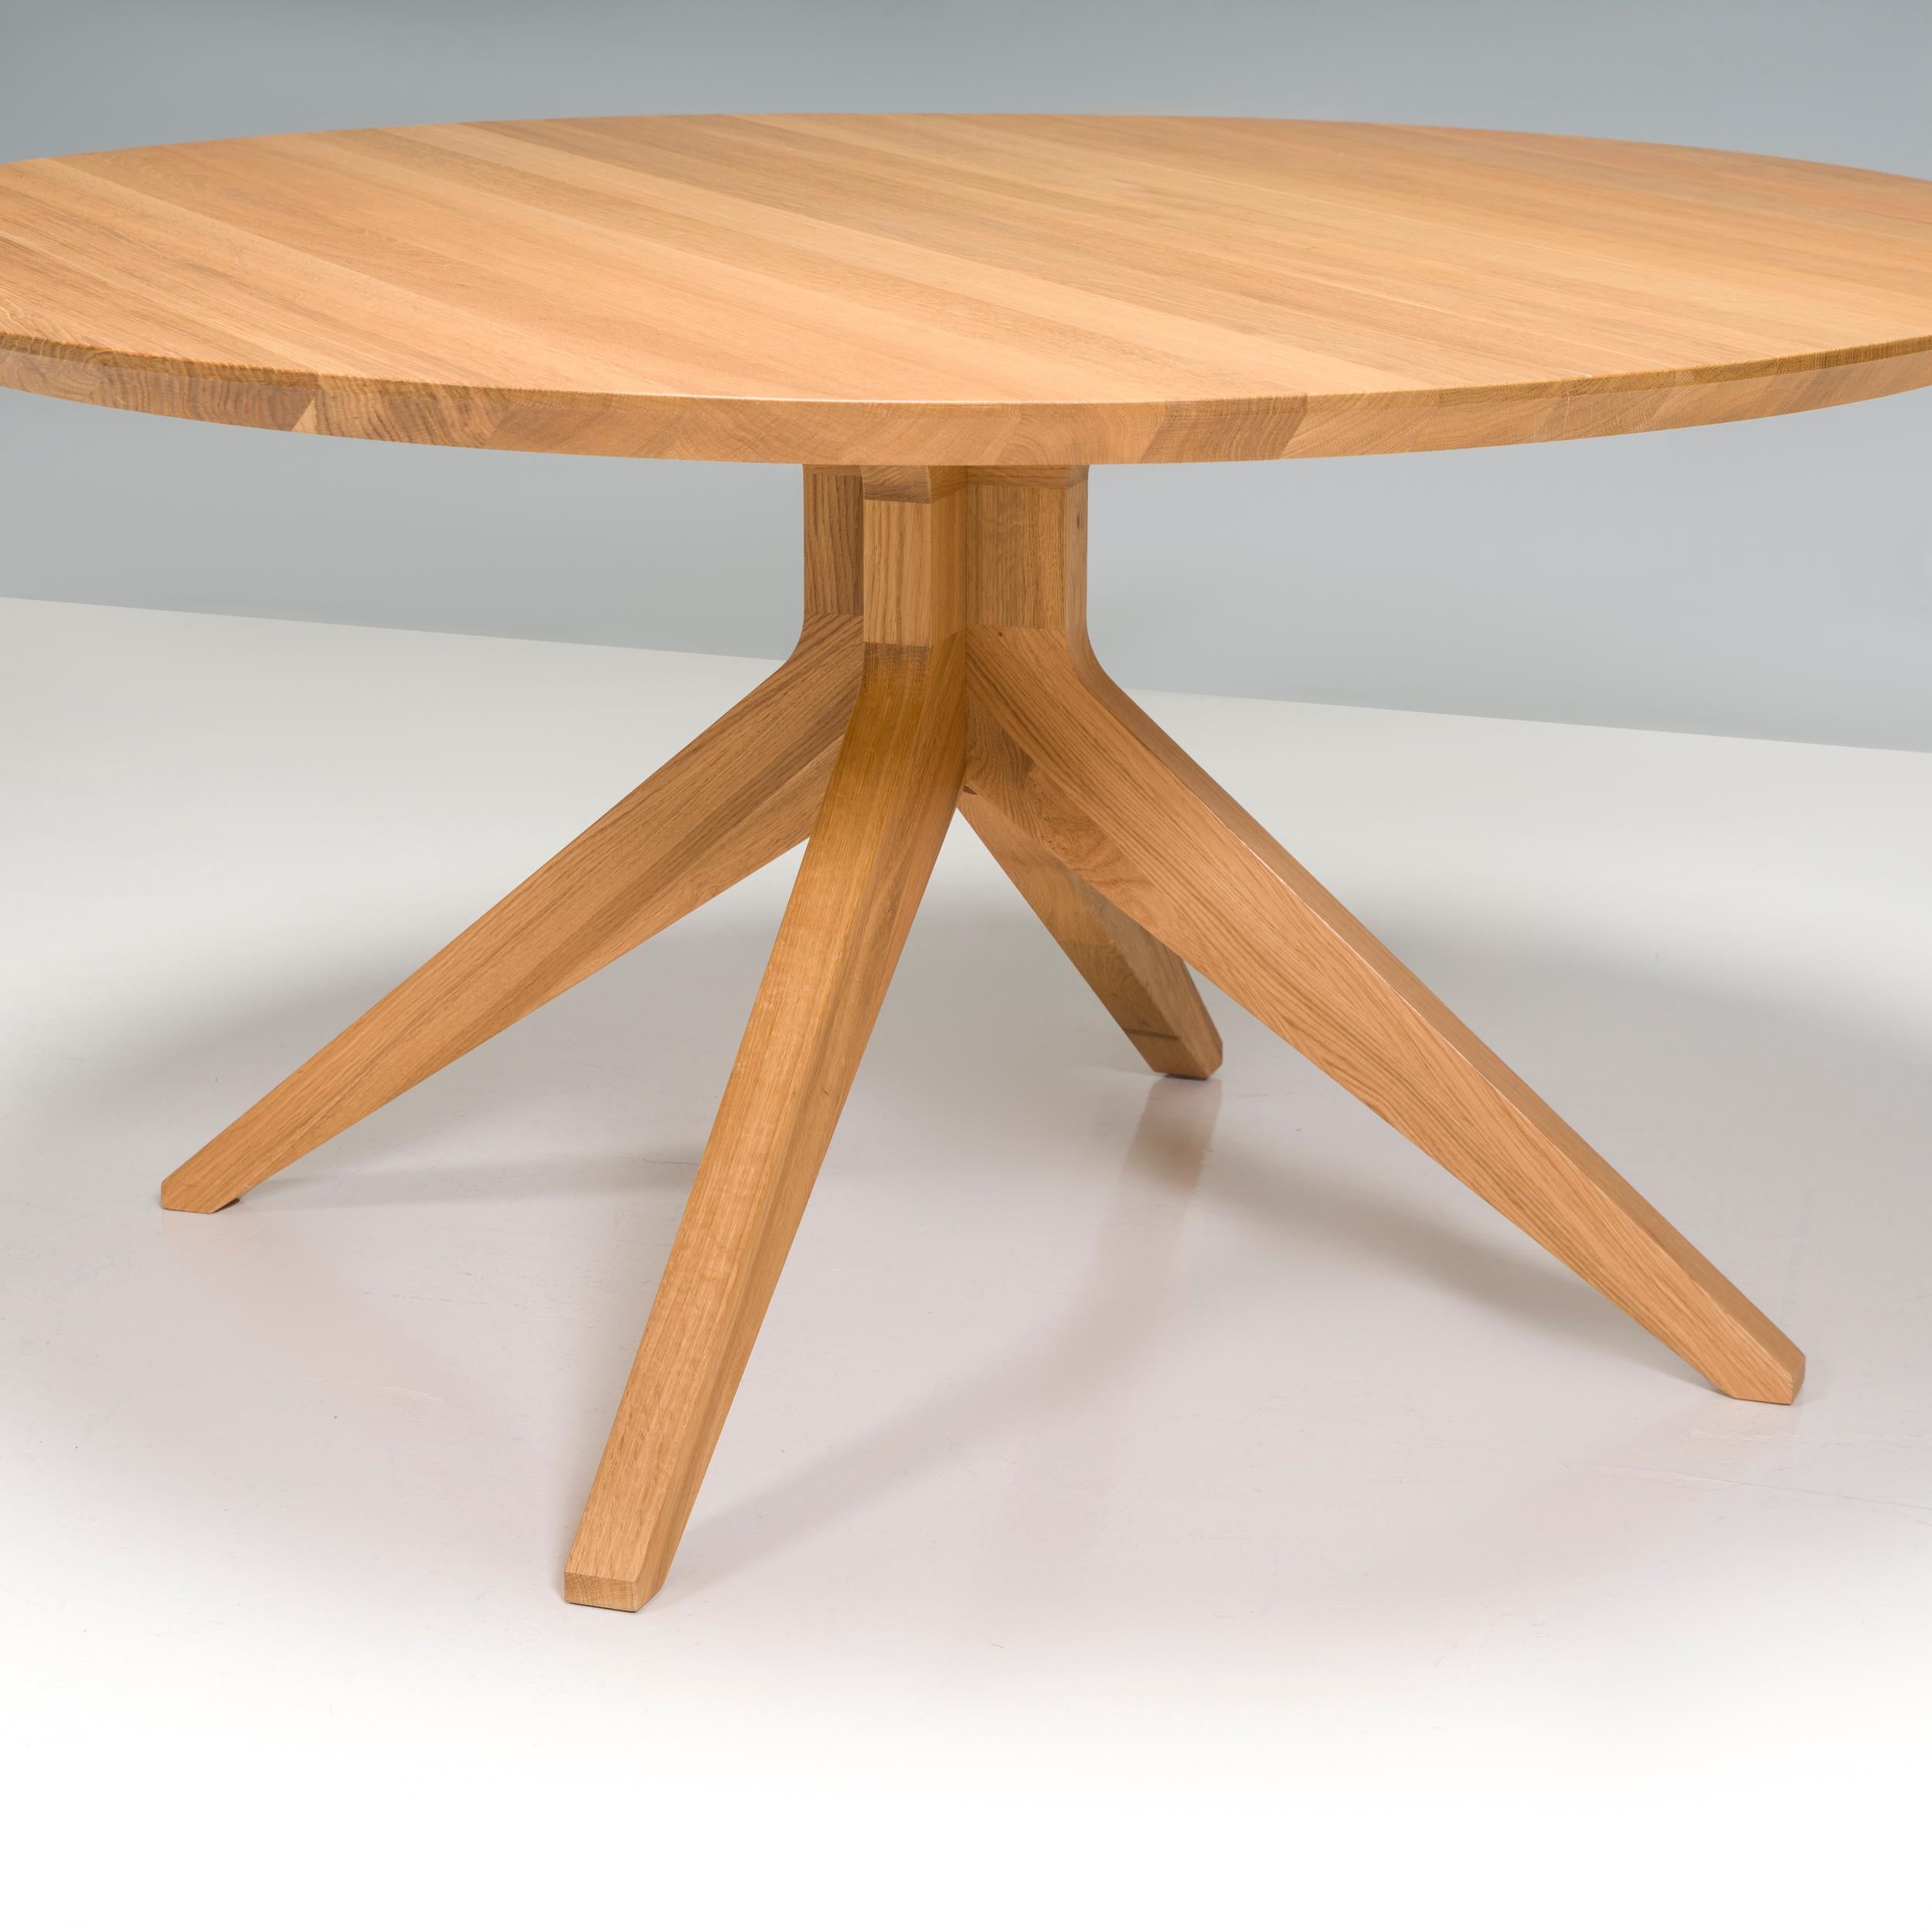 Originally designed by Matthew Hilton in 2014 and manufactured by Case furniture ever since, the Cross dining table is a fantastic example of contemporary British design.

Manufactured in Lithuania from solid oak, the dining table has a large round